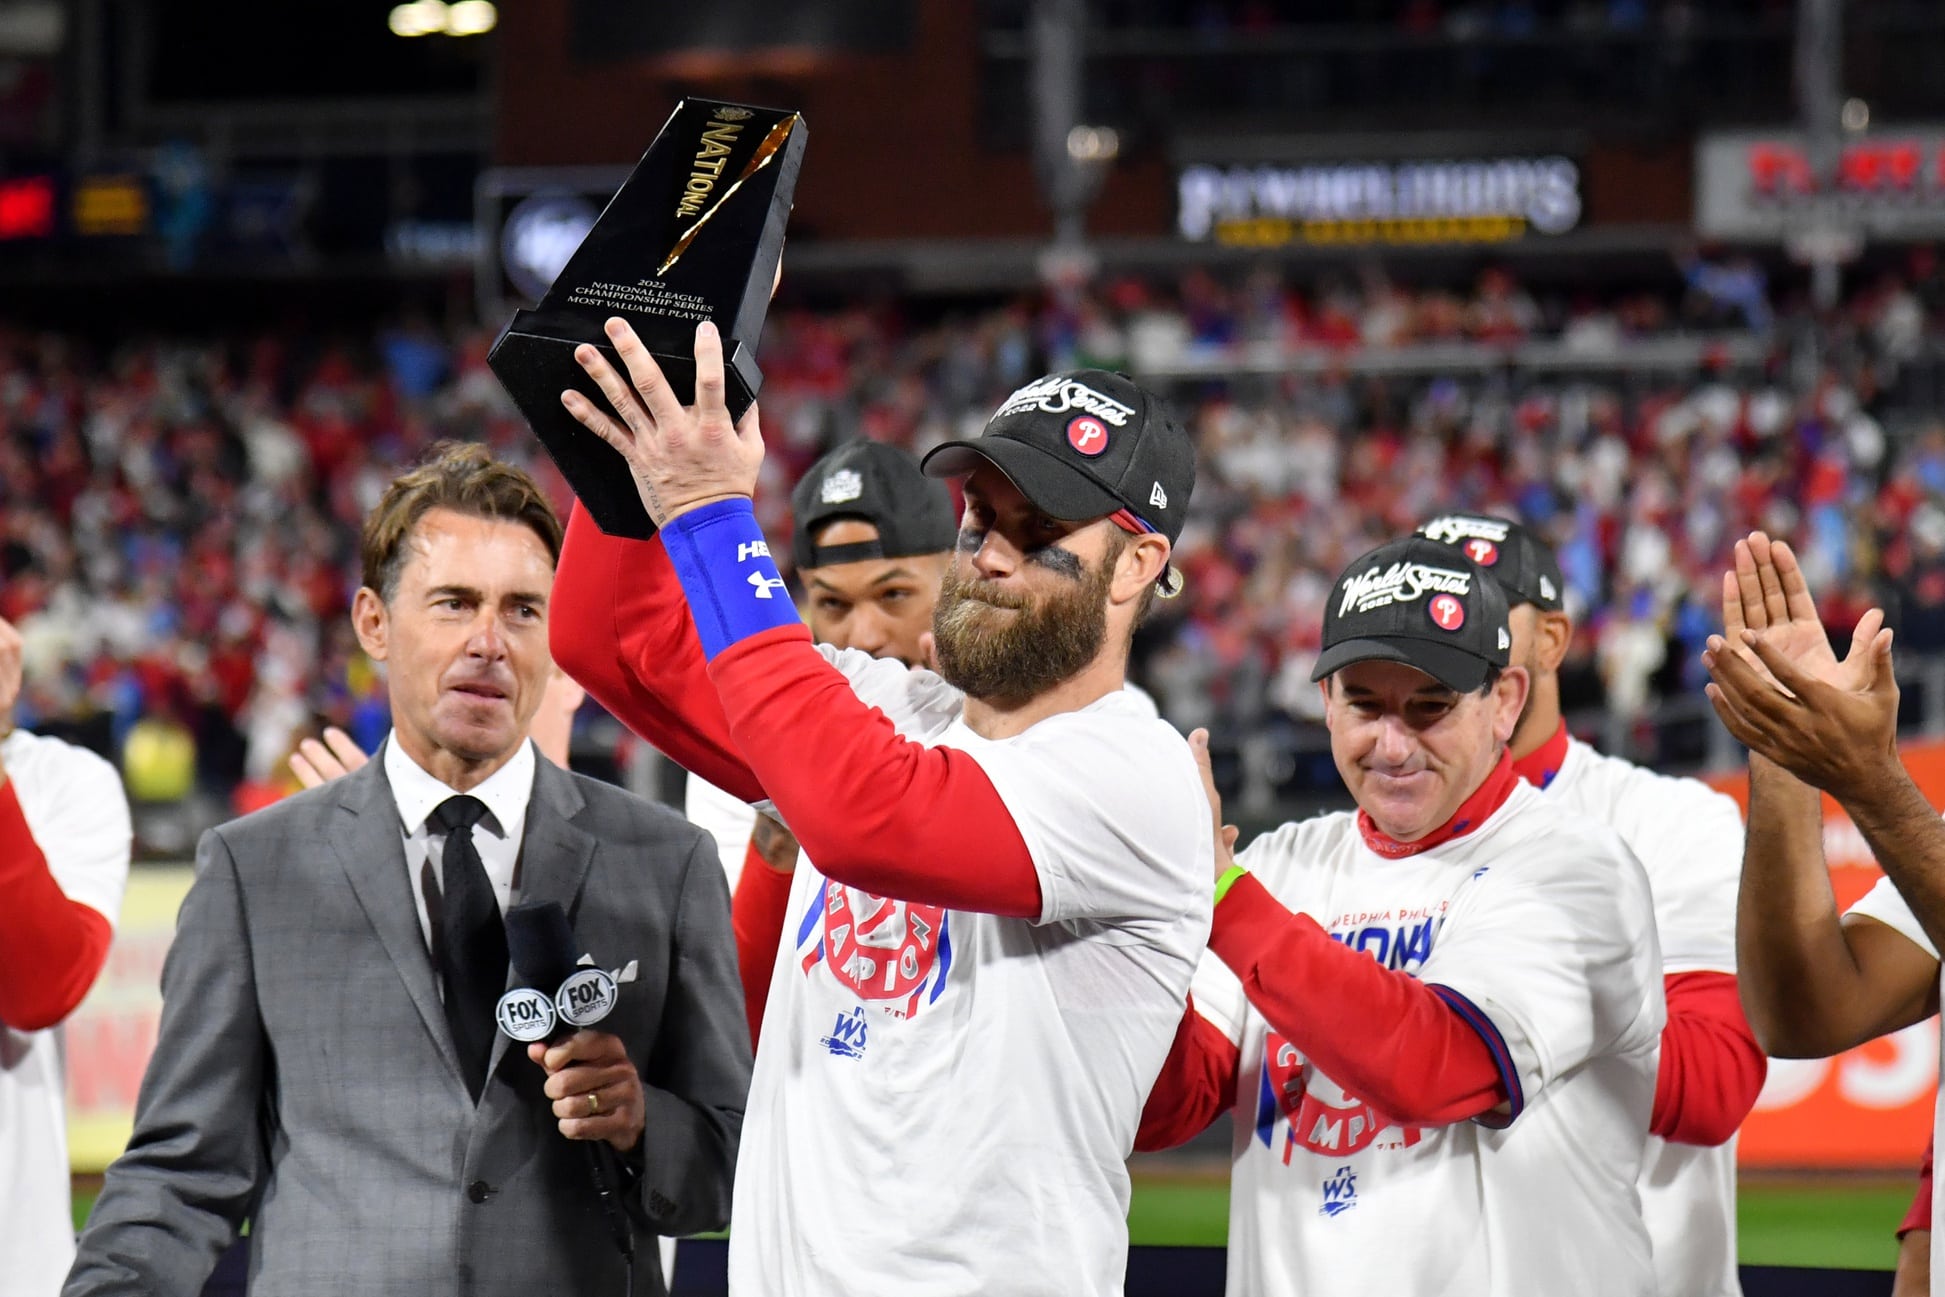 The Phillies Make a World Series Run for the Ages